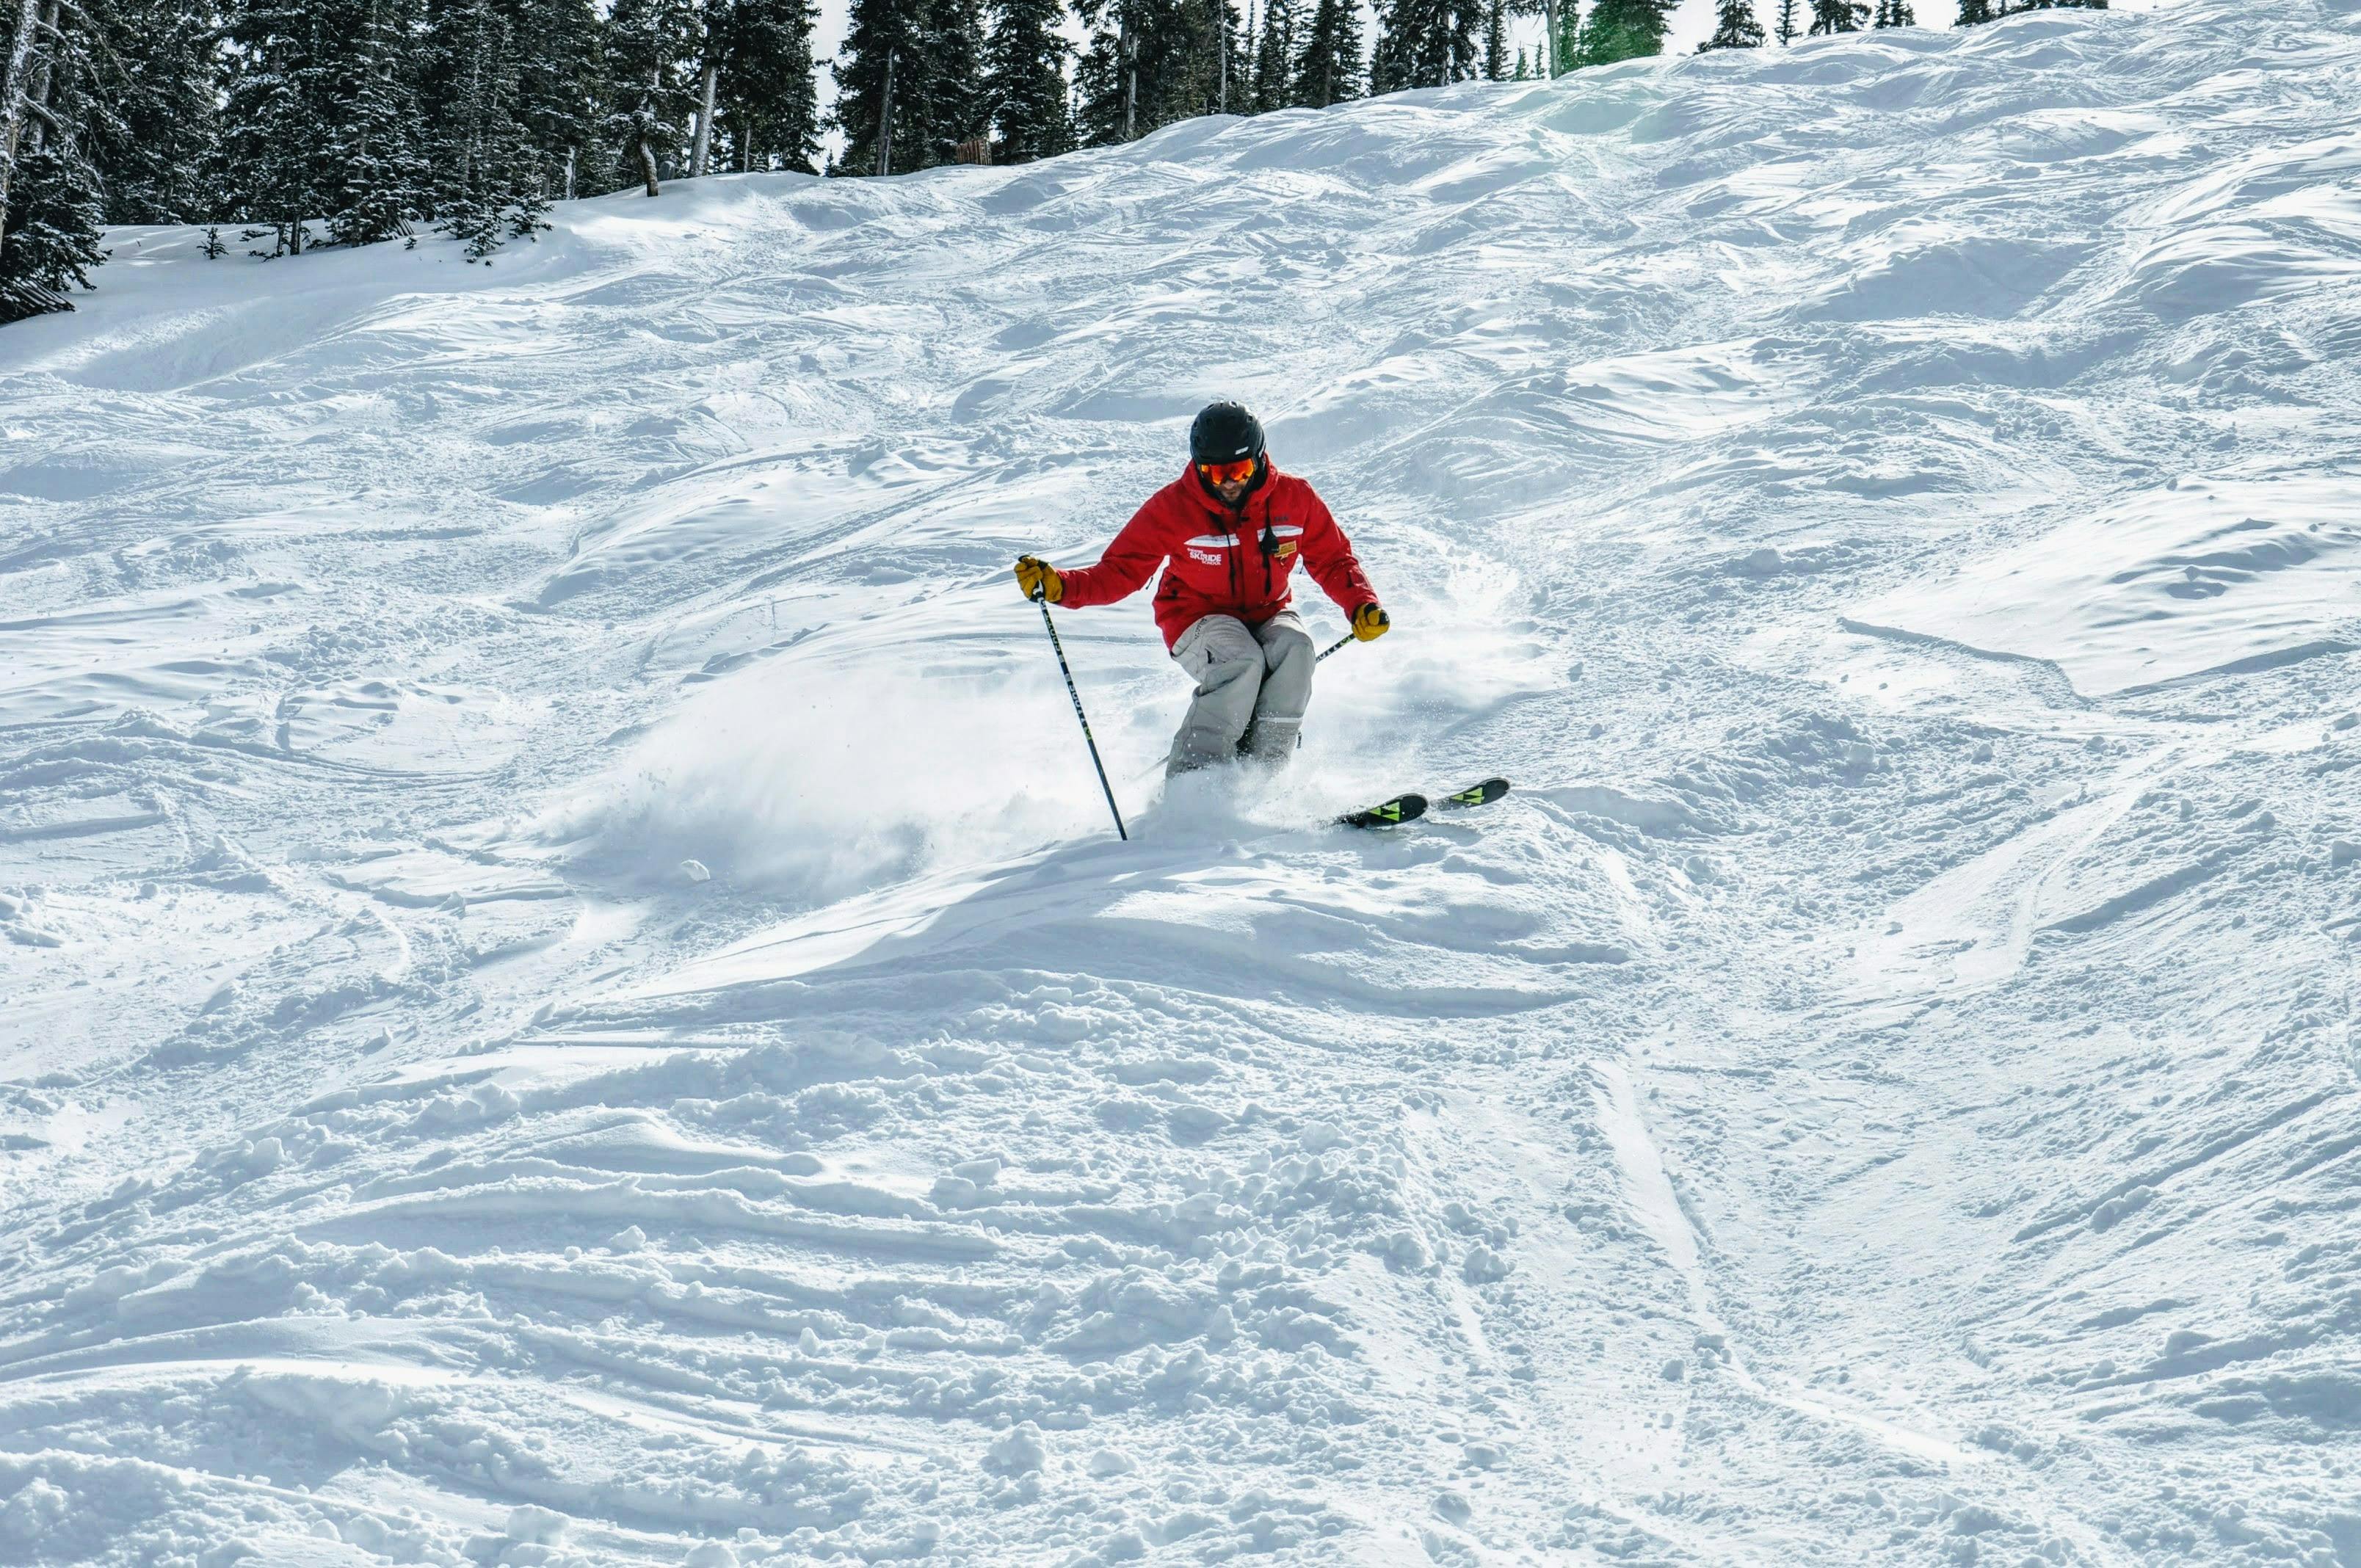 A skier in a red jacket heading down a mogul field